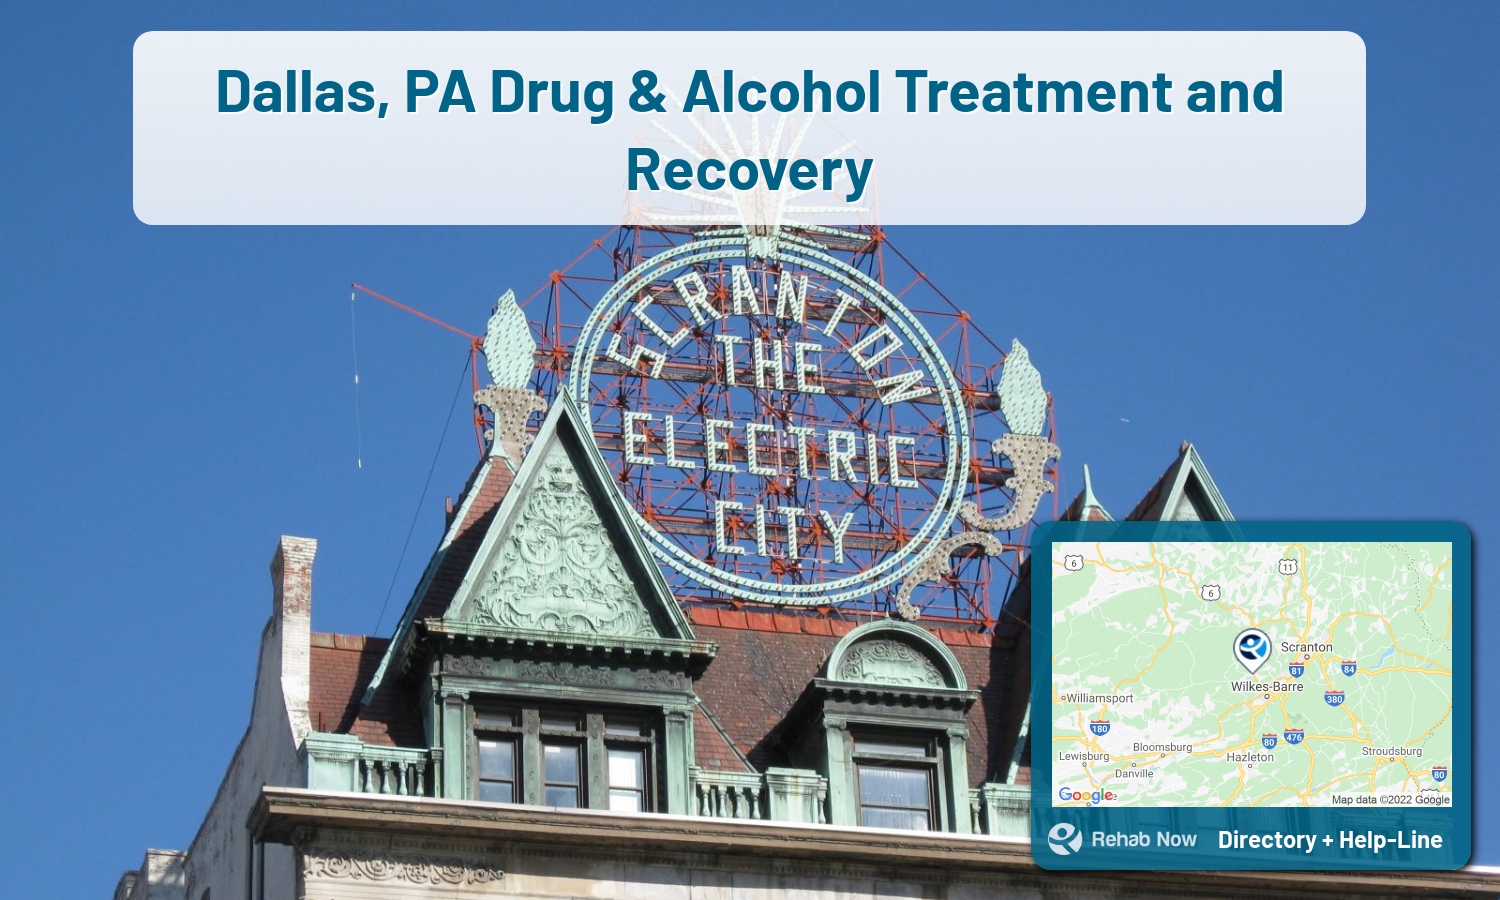 Drug rehab and alcohol treatment services nearby Dallas, PA. Need help choosing a treatment program? Call our free hotline!